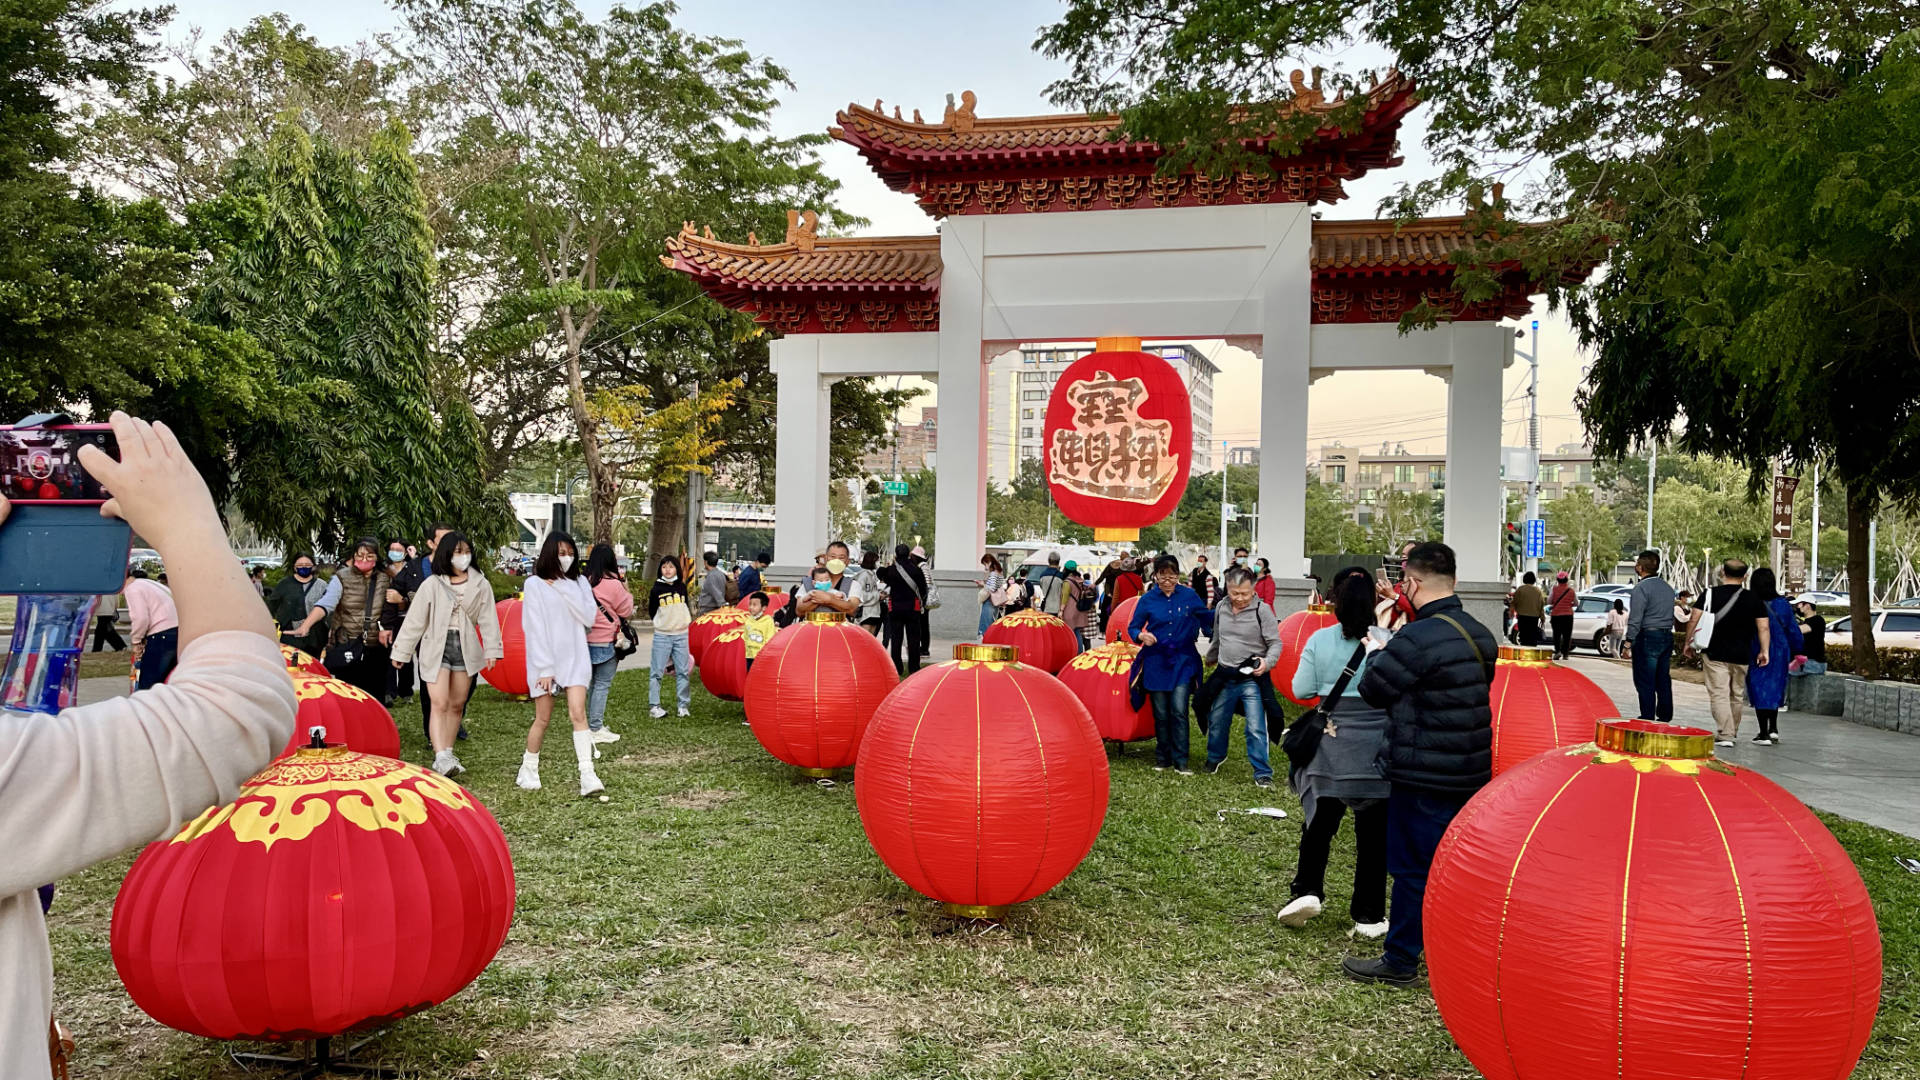 A large lantern hanging from a traditional Chinese gate, with dozens of people taking photos and walking nearby.